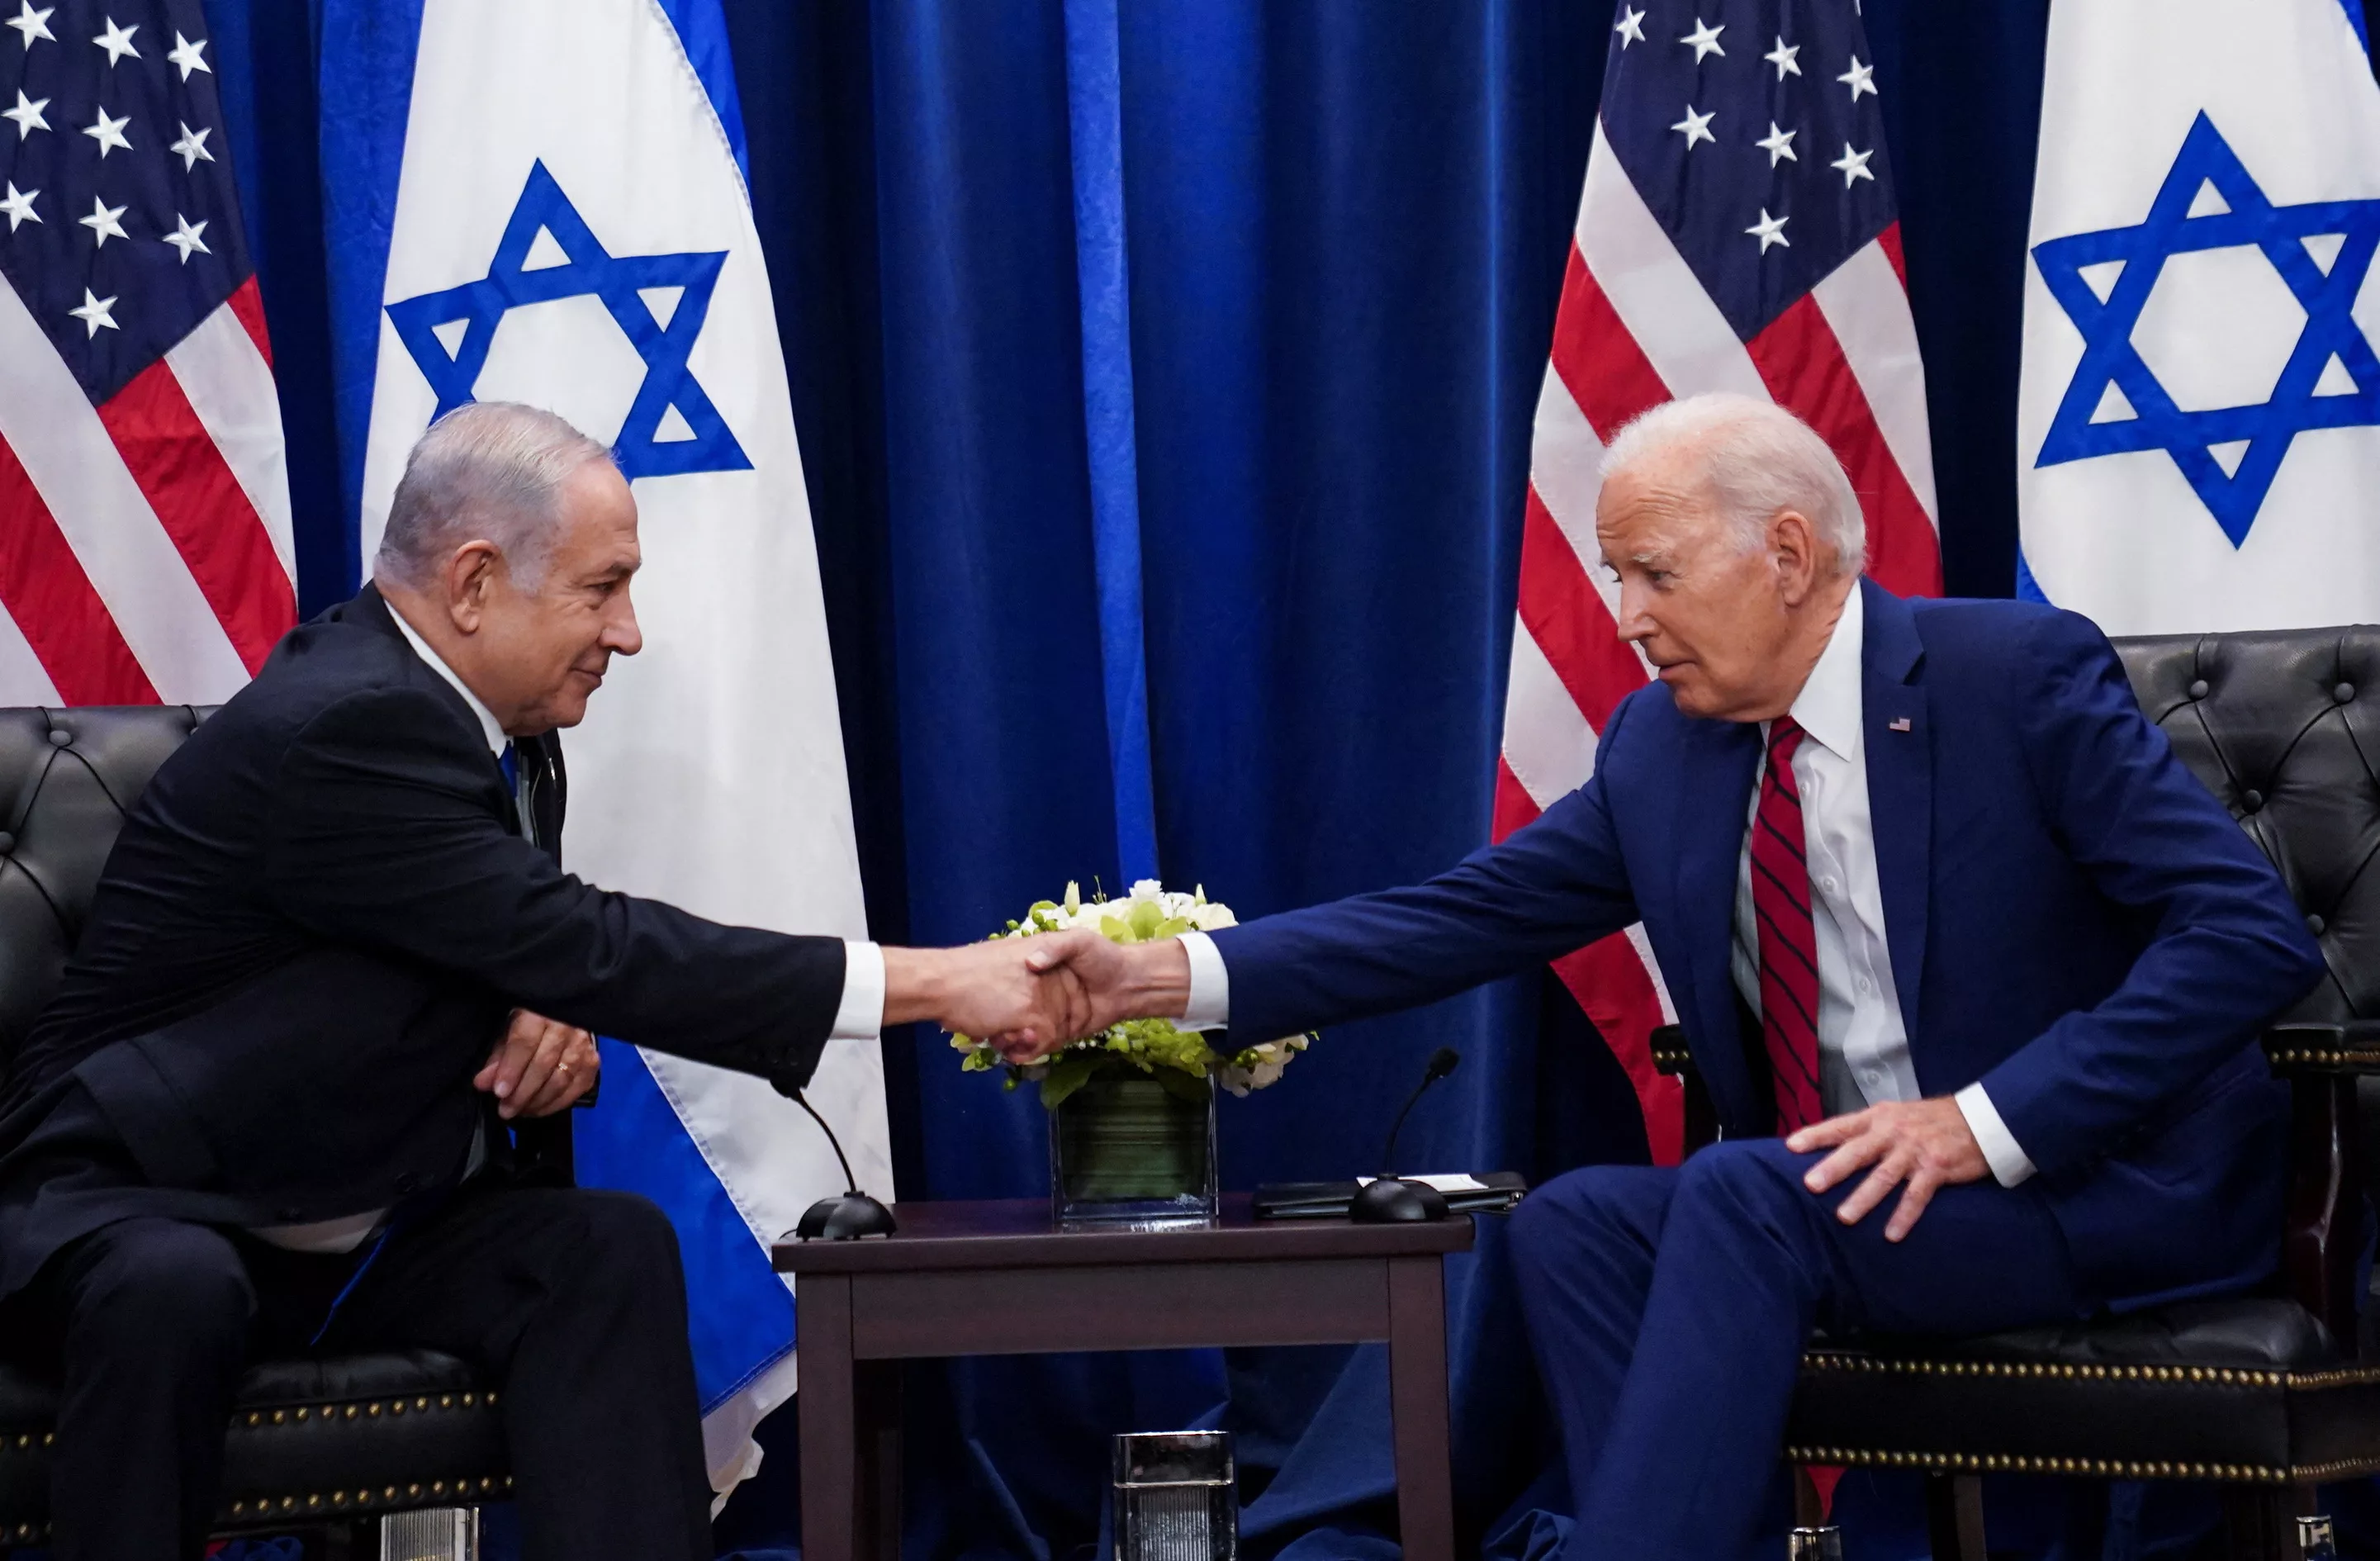 U.S. President Joe Biden holds a bilateral meeting with Israeli Prime Minister Benjamin Netanyahu on the sidelines of the 78th U.N. General Assembly in New York City, September 20, 2023. REUTERS/Kevin Lamarque